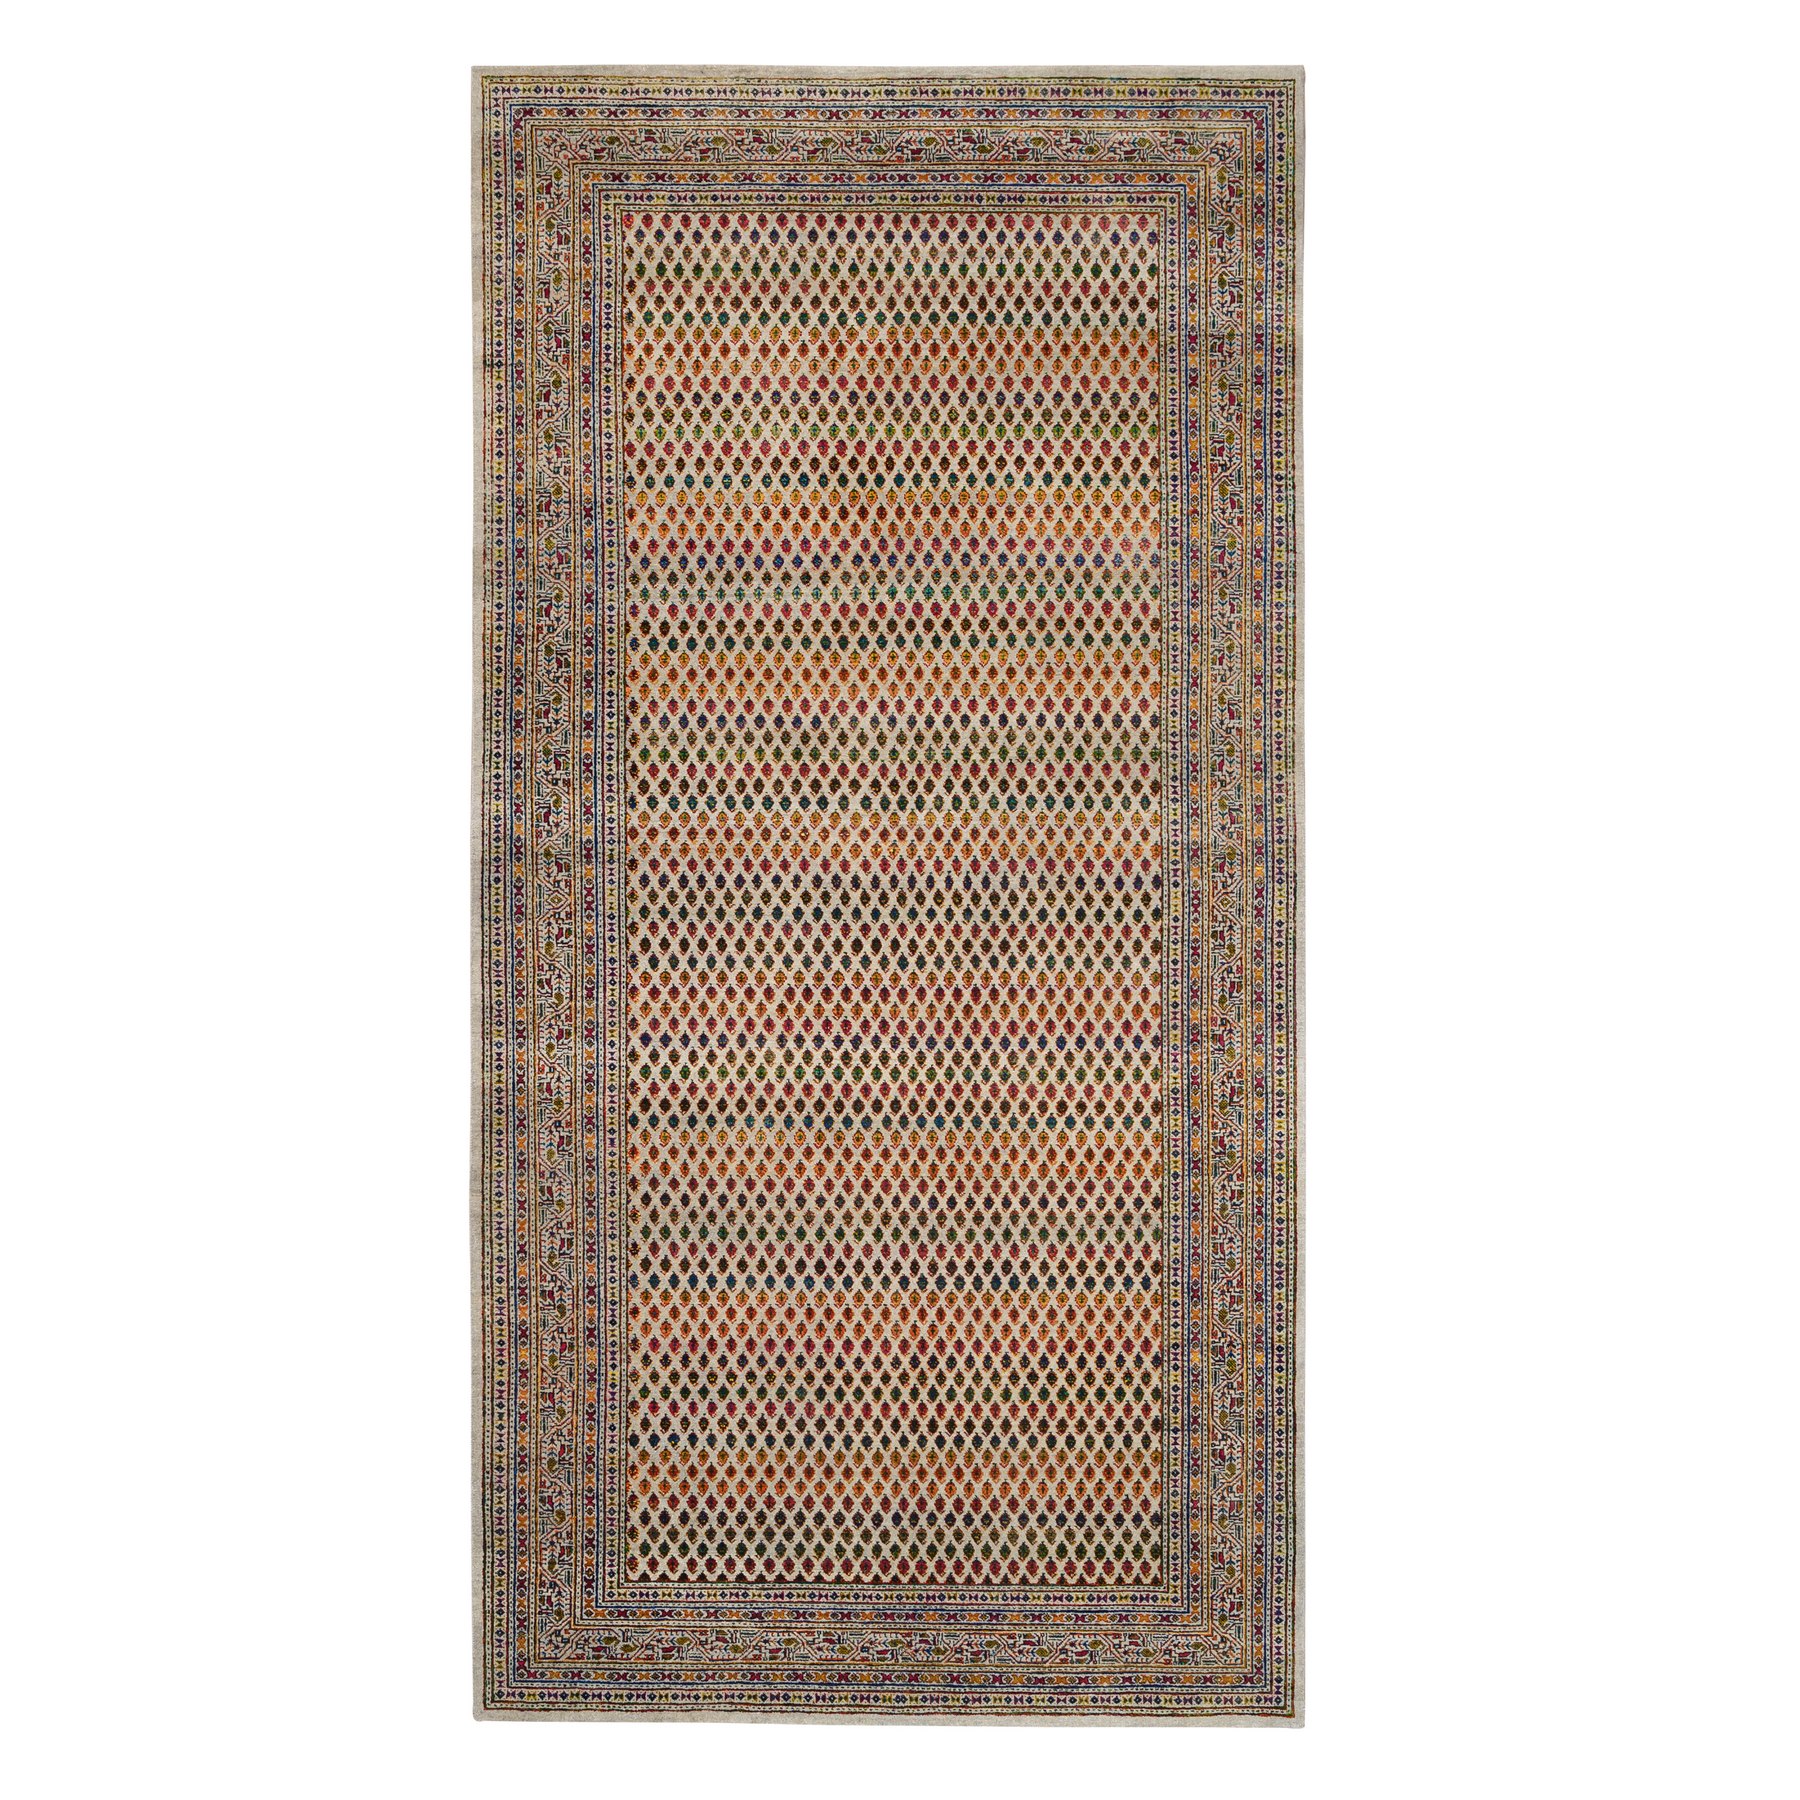 5'9"x12' Sarouk Mir Inspired With Repetitive Boteh Design Colorful Wool And Sari Silk Hand Woven Beige Wide Gallery Size Runner Oriental Rug 